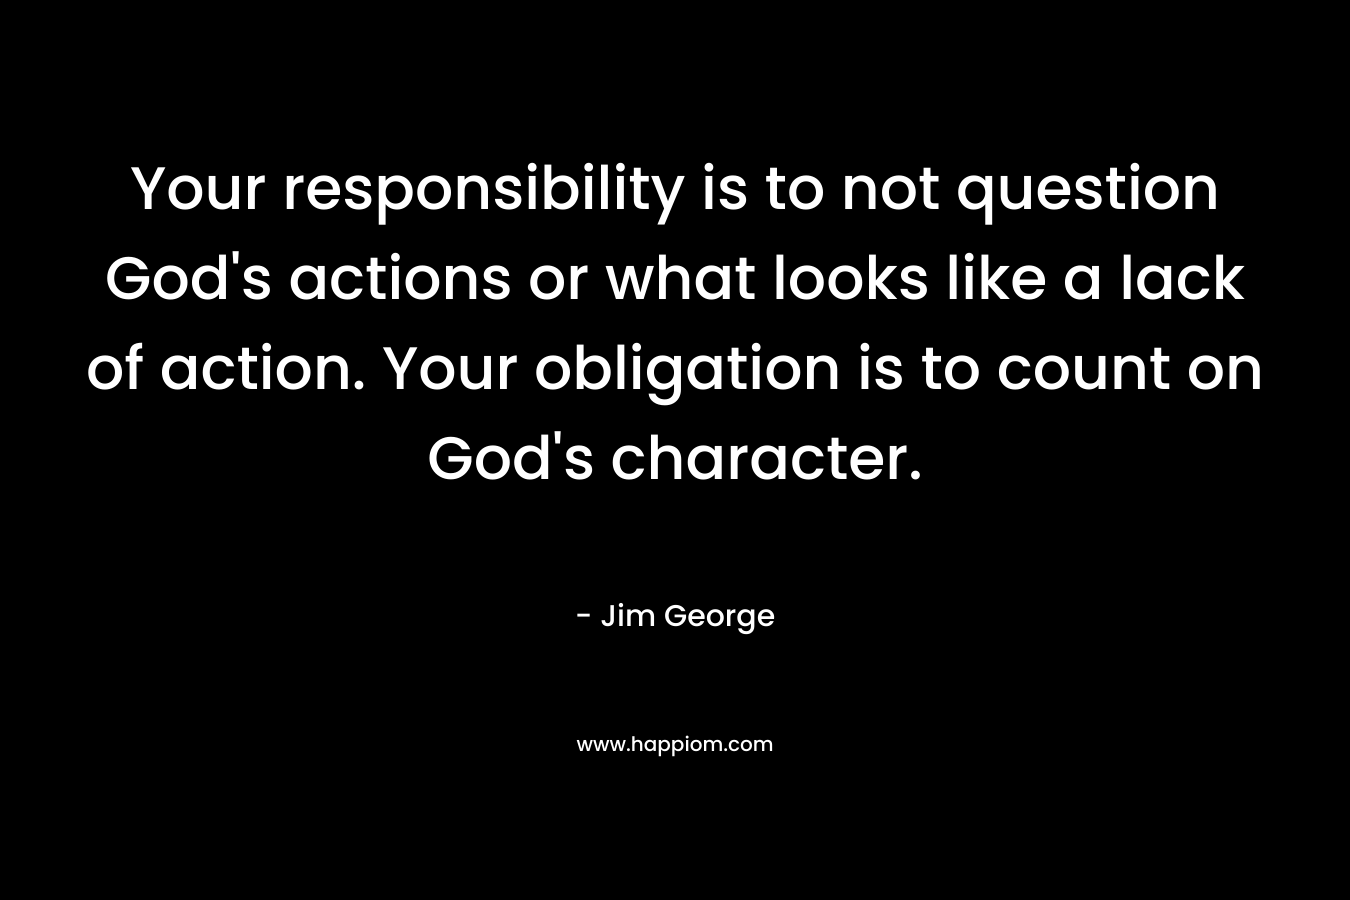 Your responsibility is to not question God's actions or what looks like a lack of action. Your obligation is to count on God's character.